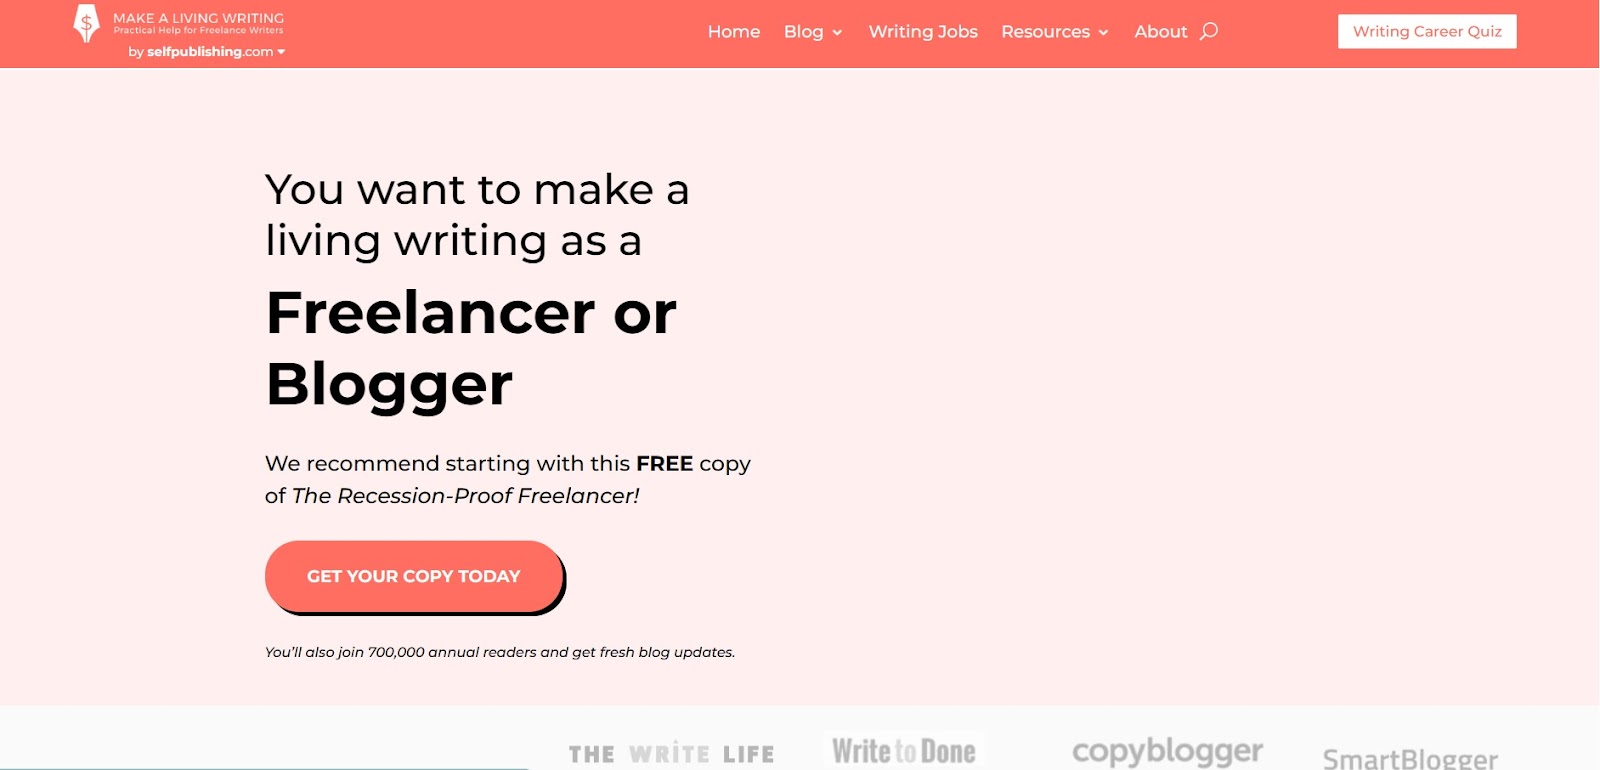 write articles and earn money website